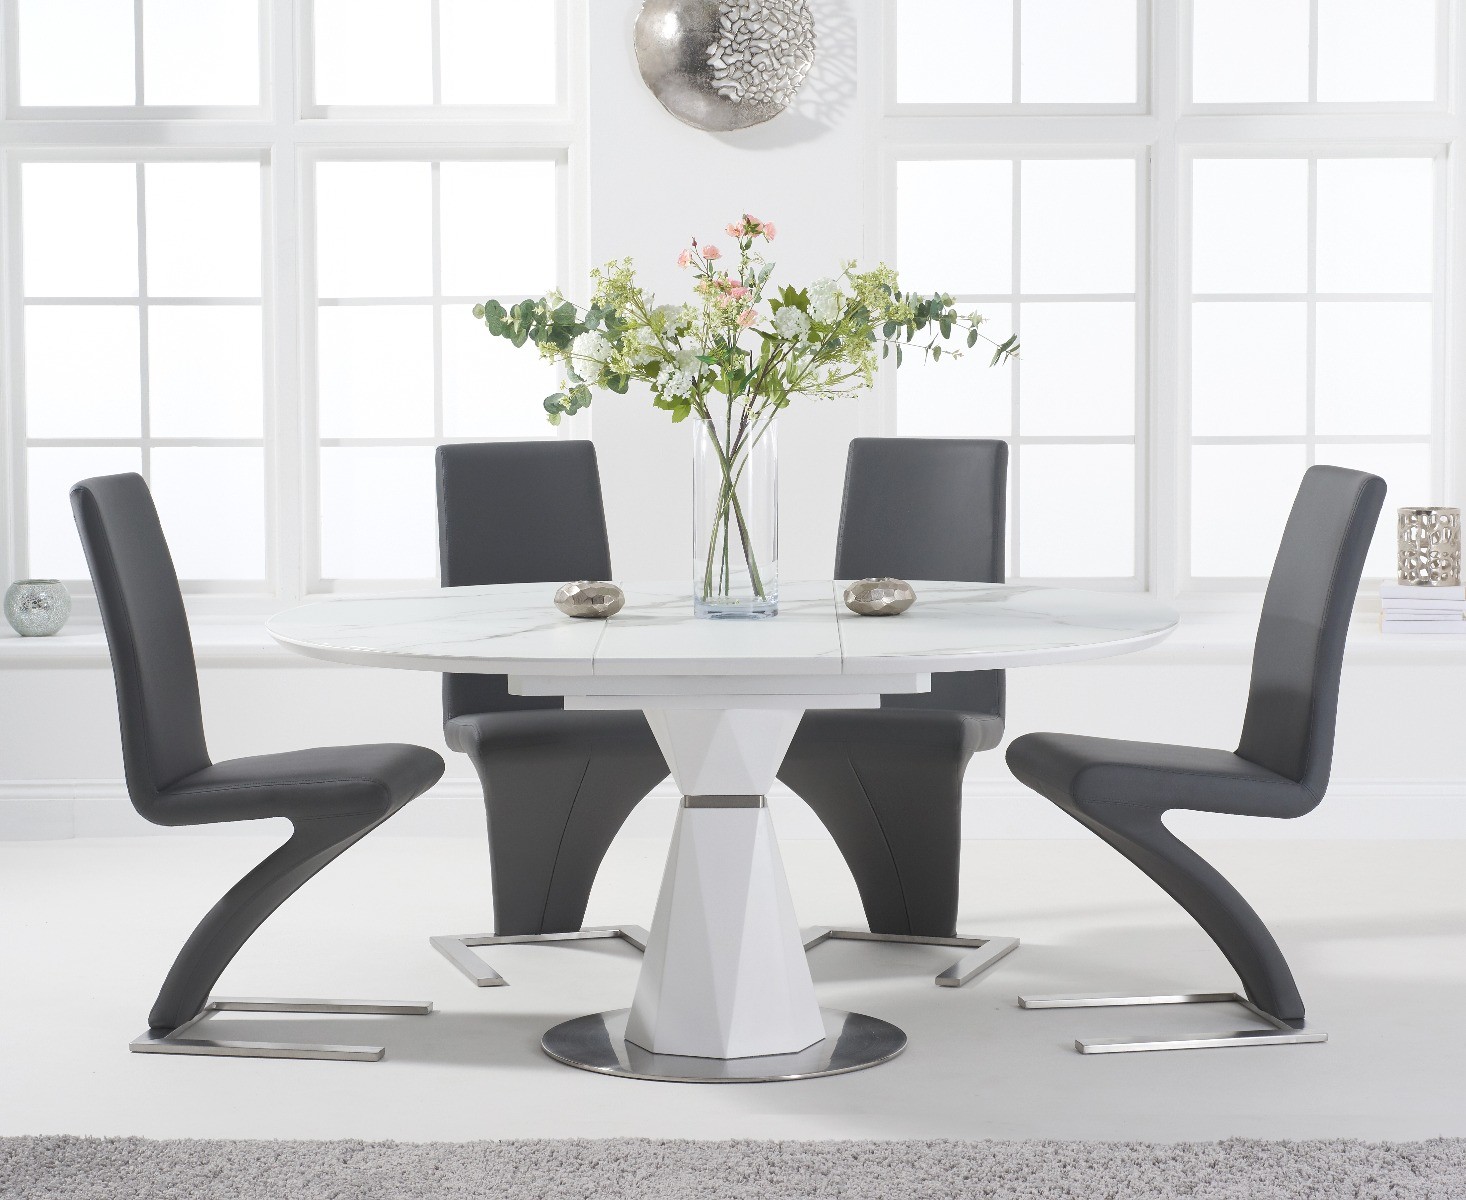 Photo 2 of Venosa 120cm round white dining table with 6 black aldo chairs